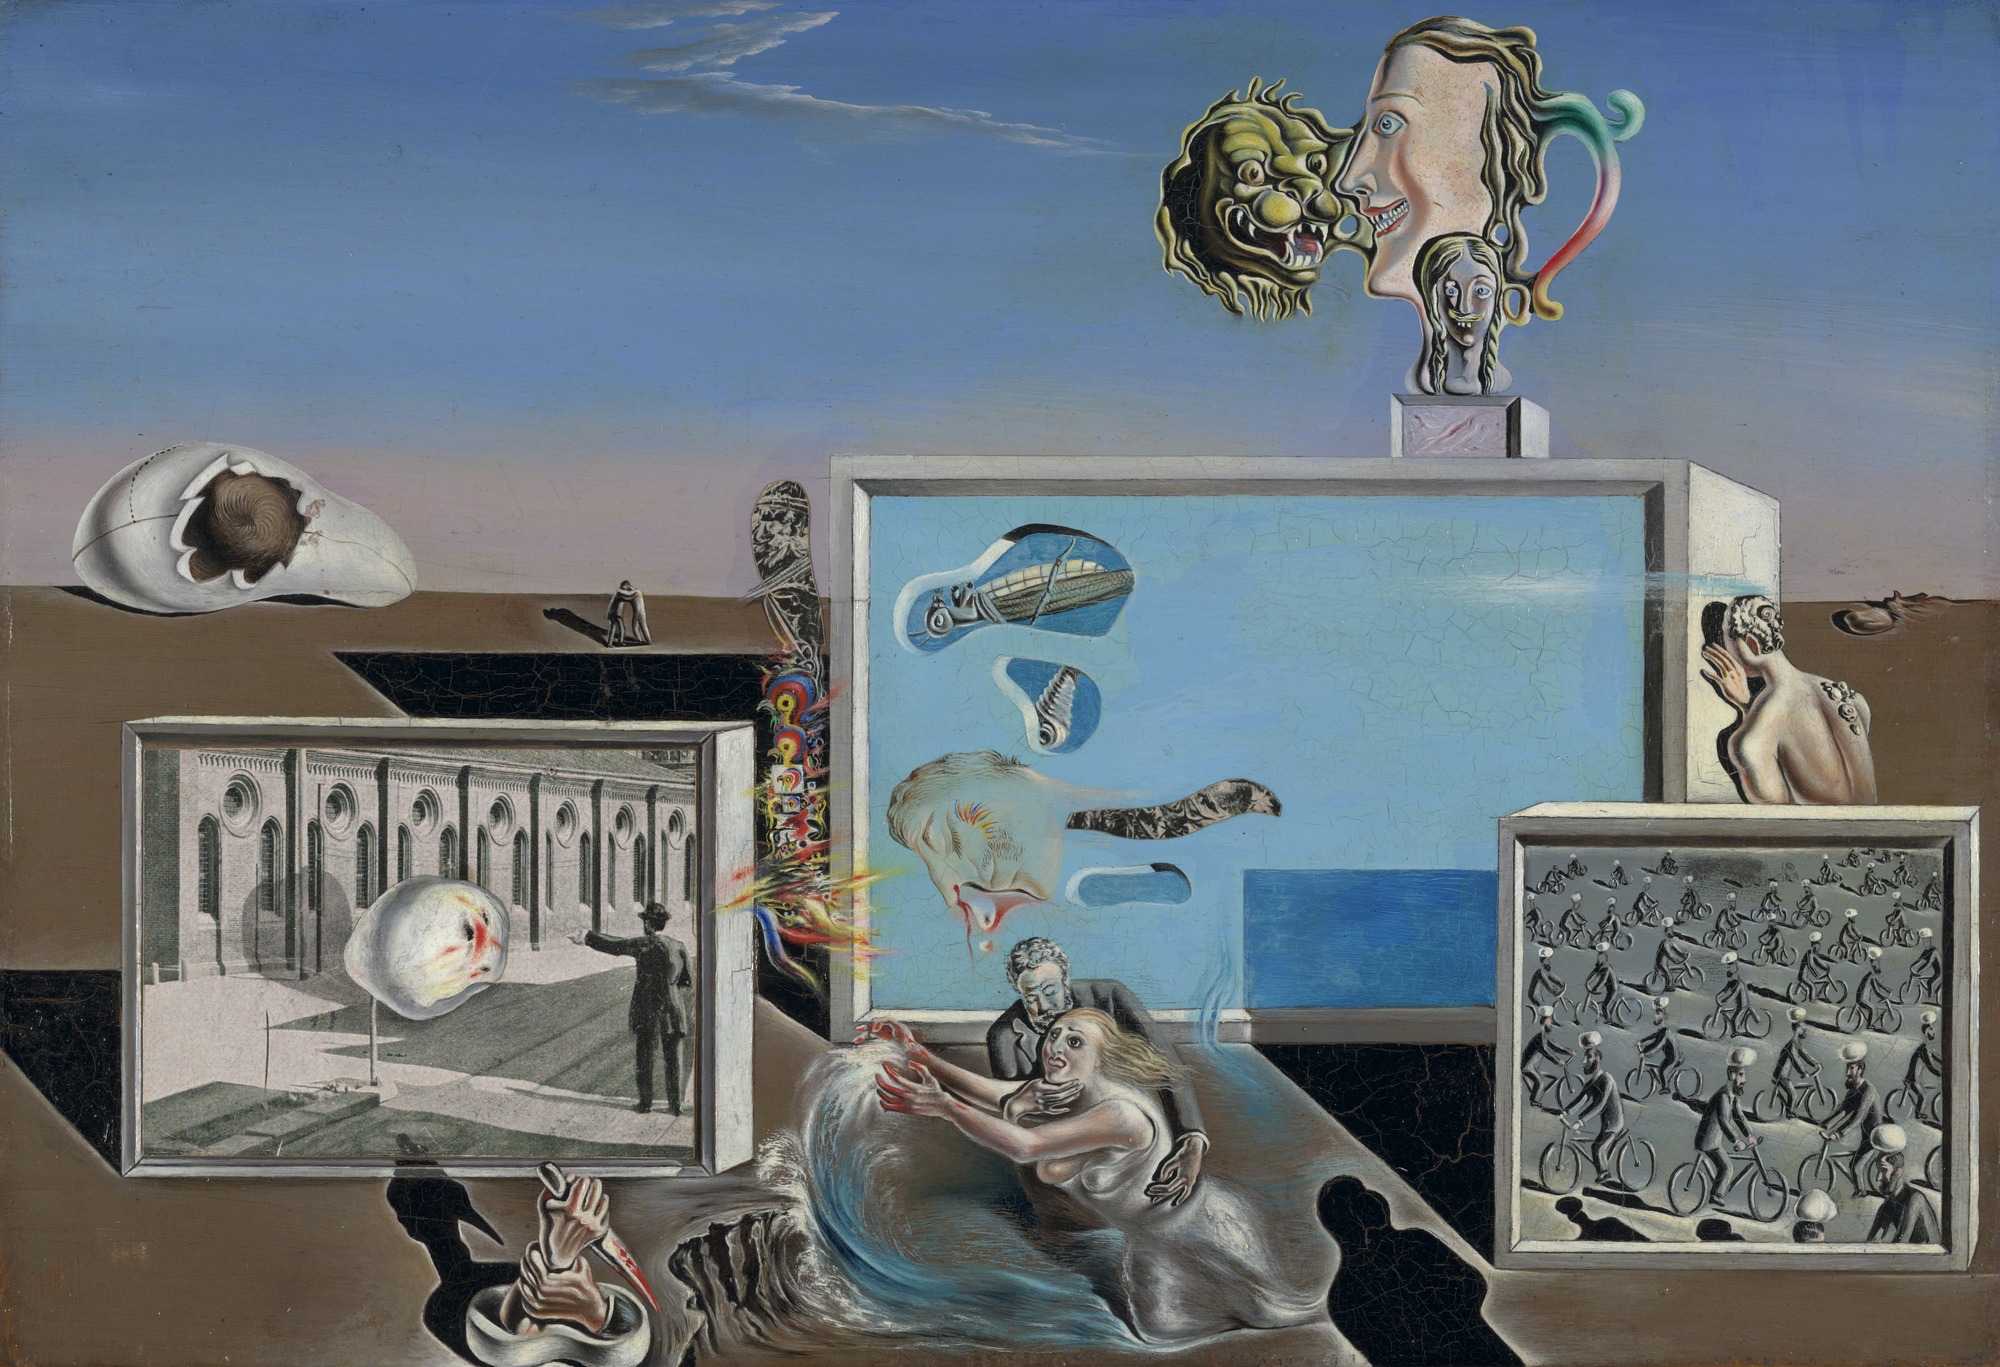 Salvador Dalí, Illumined Pleasures, 1929, oil and collage on board, 9 3/8 x 13 ¾ inches (MoMA)